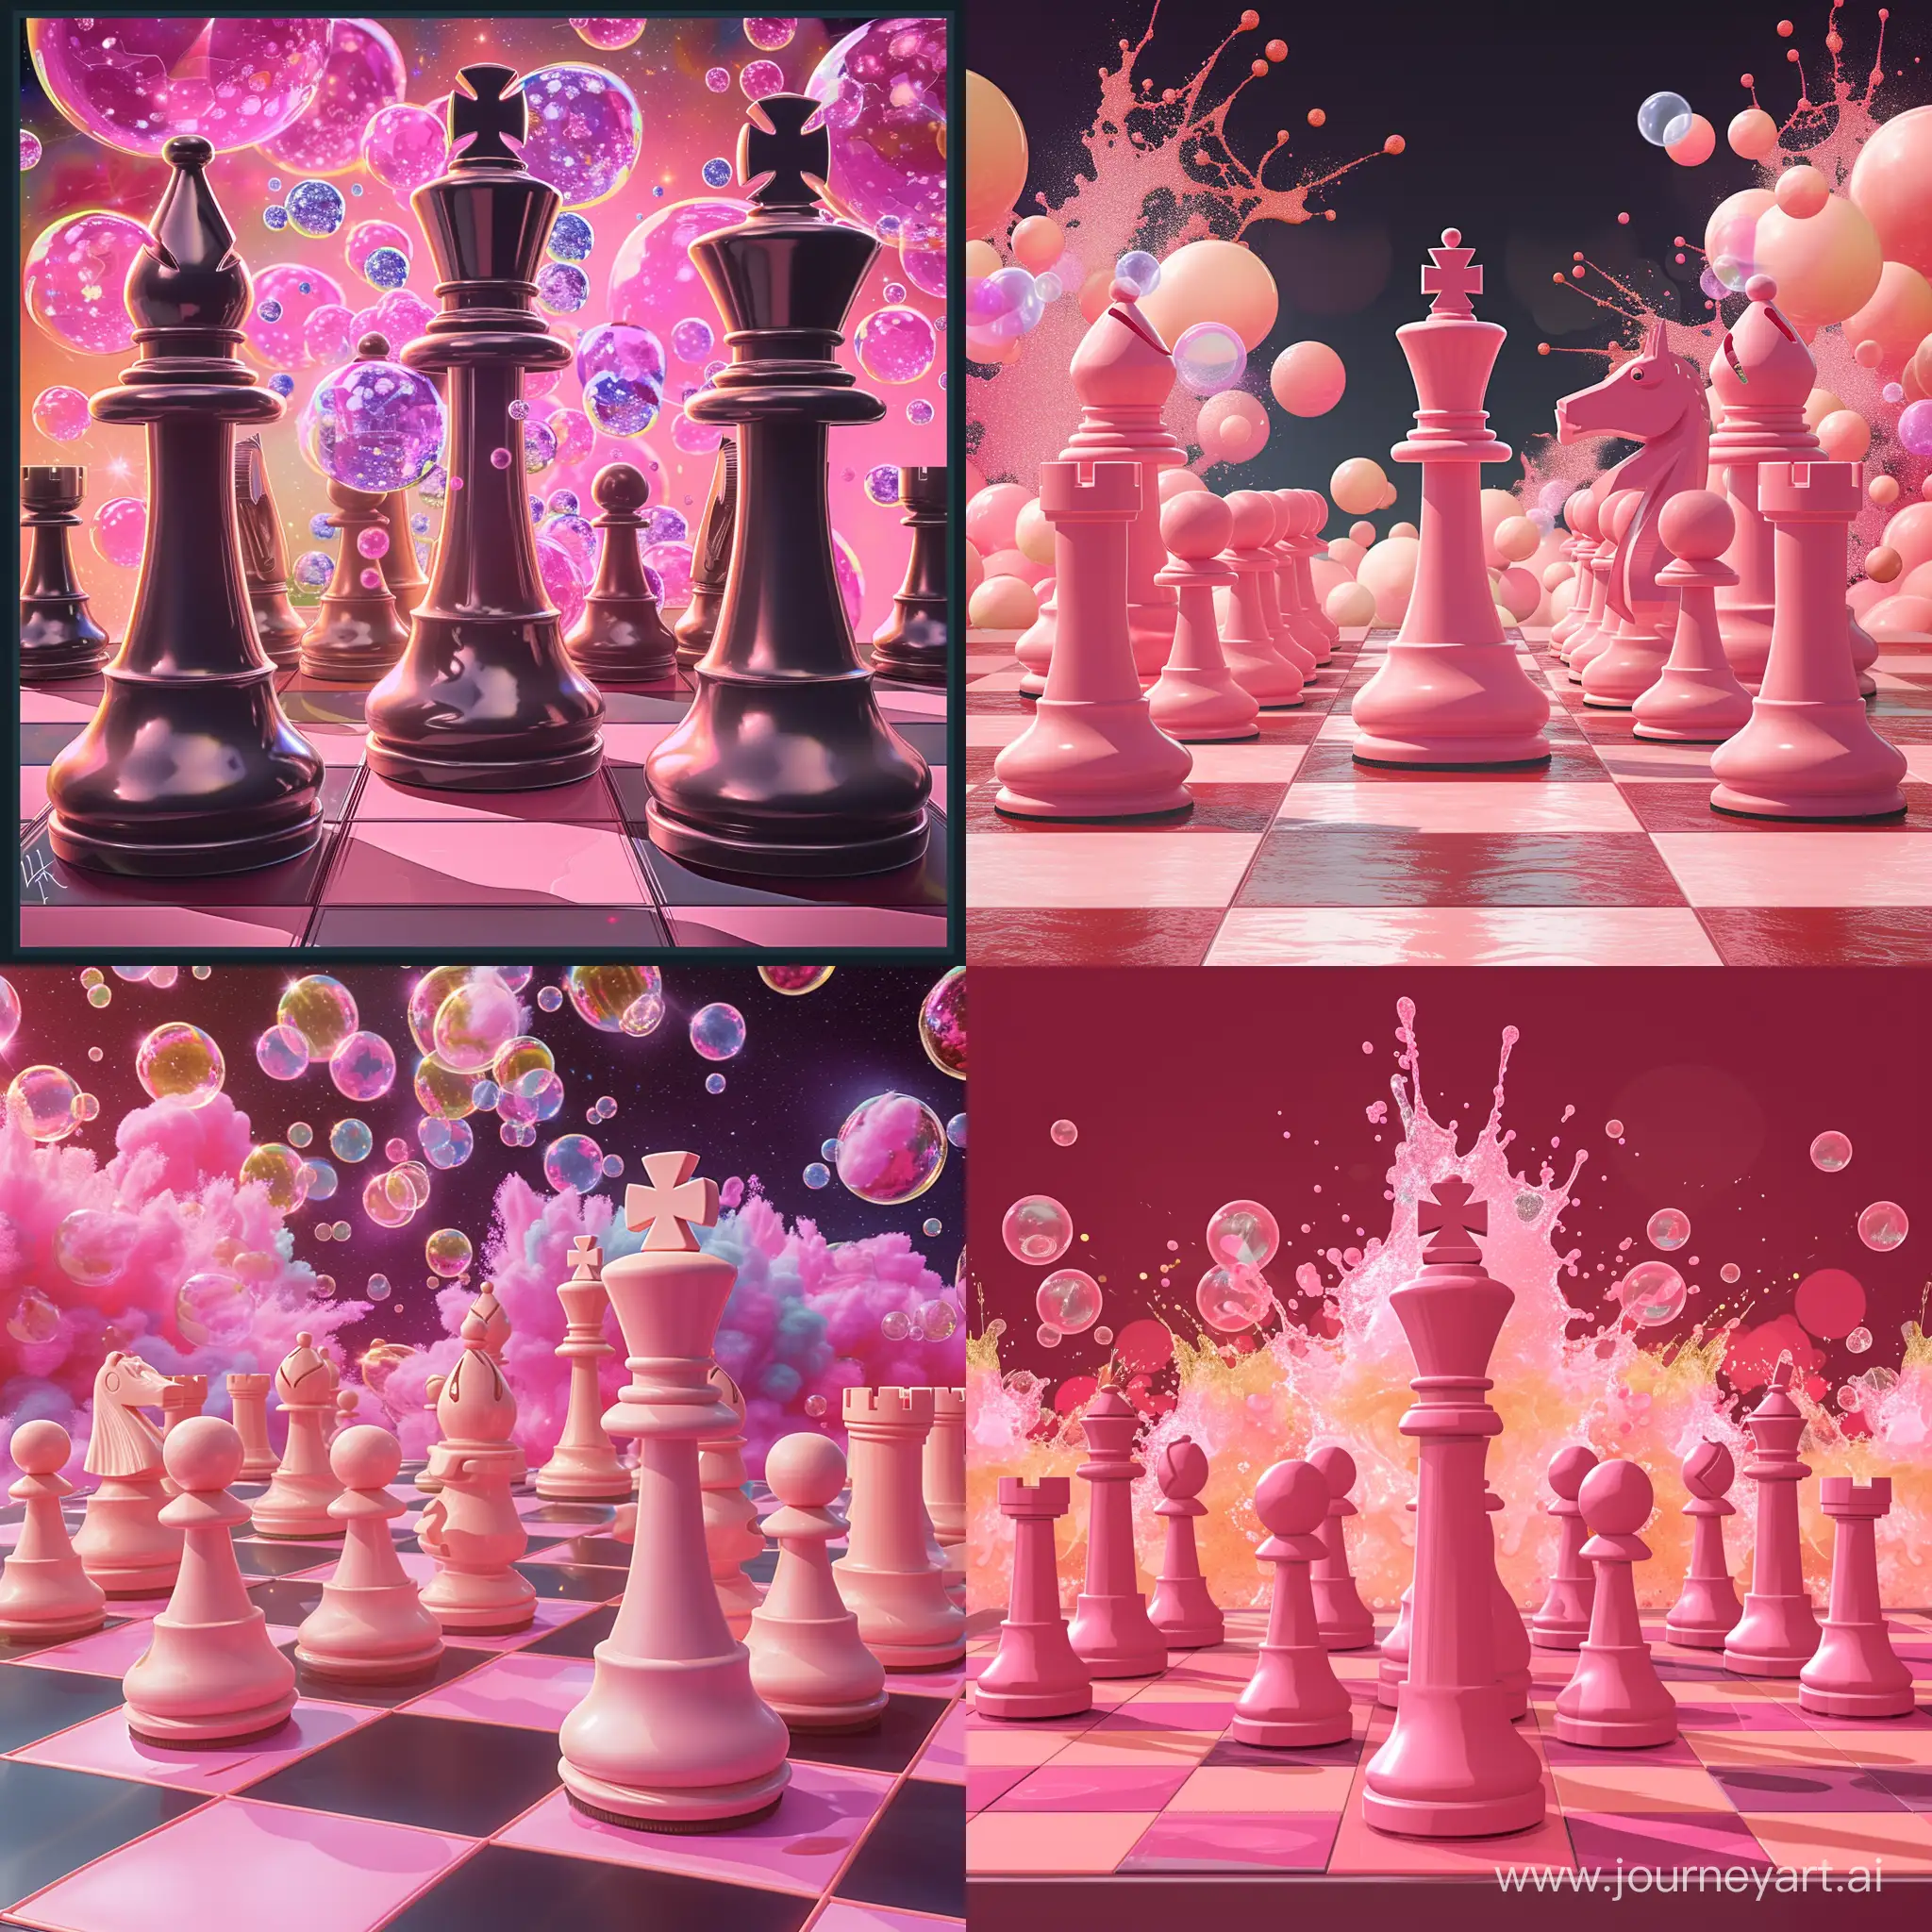 Elixir-Gamesthemed-Auto-Chess-Arena-with-Vibrant-Pink-Chessboard